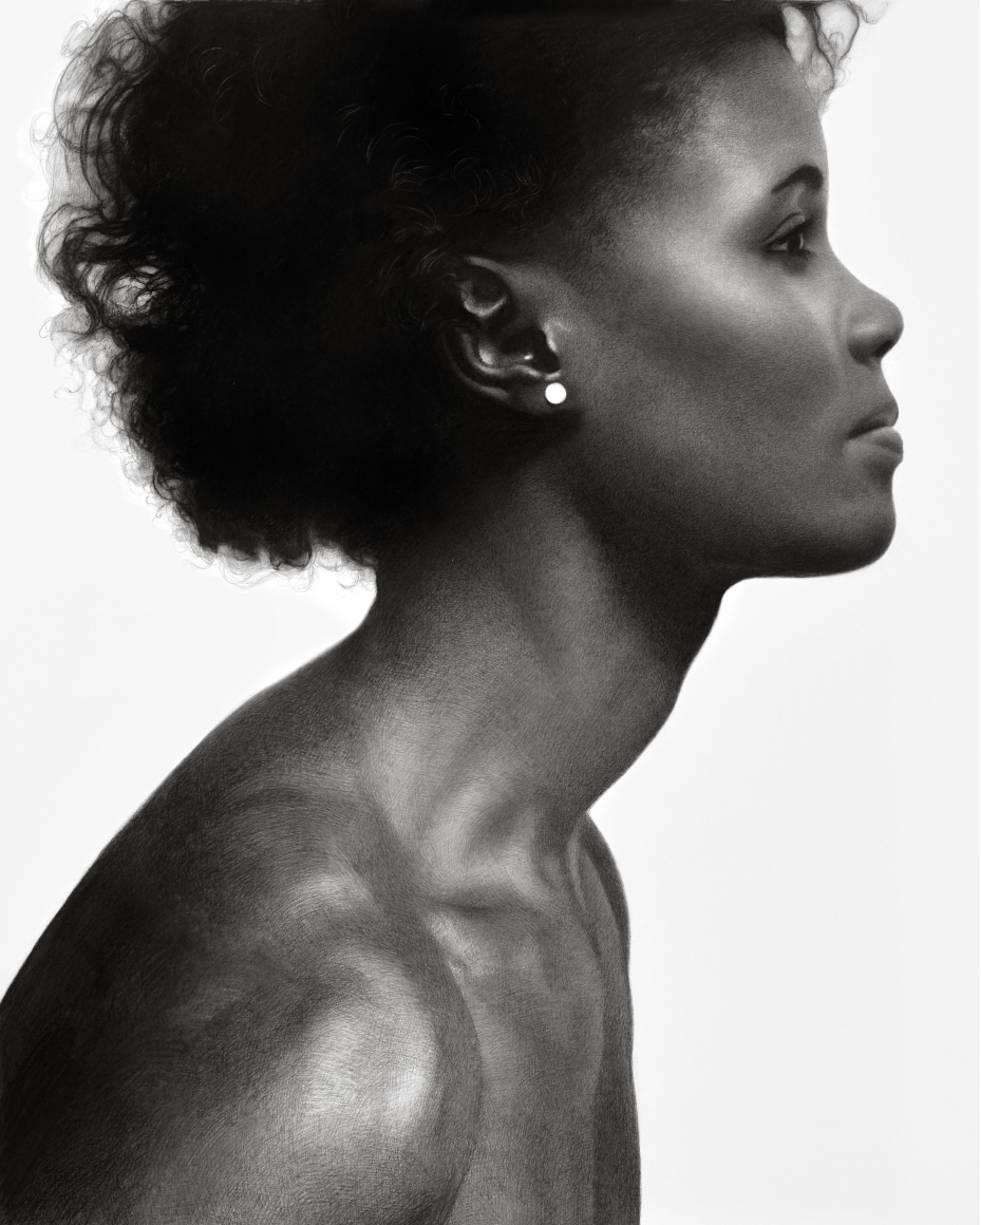 profile of woman with man's shoulders